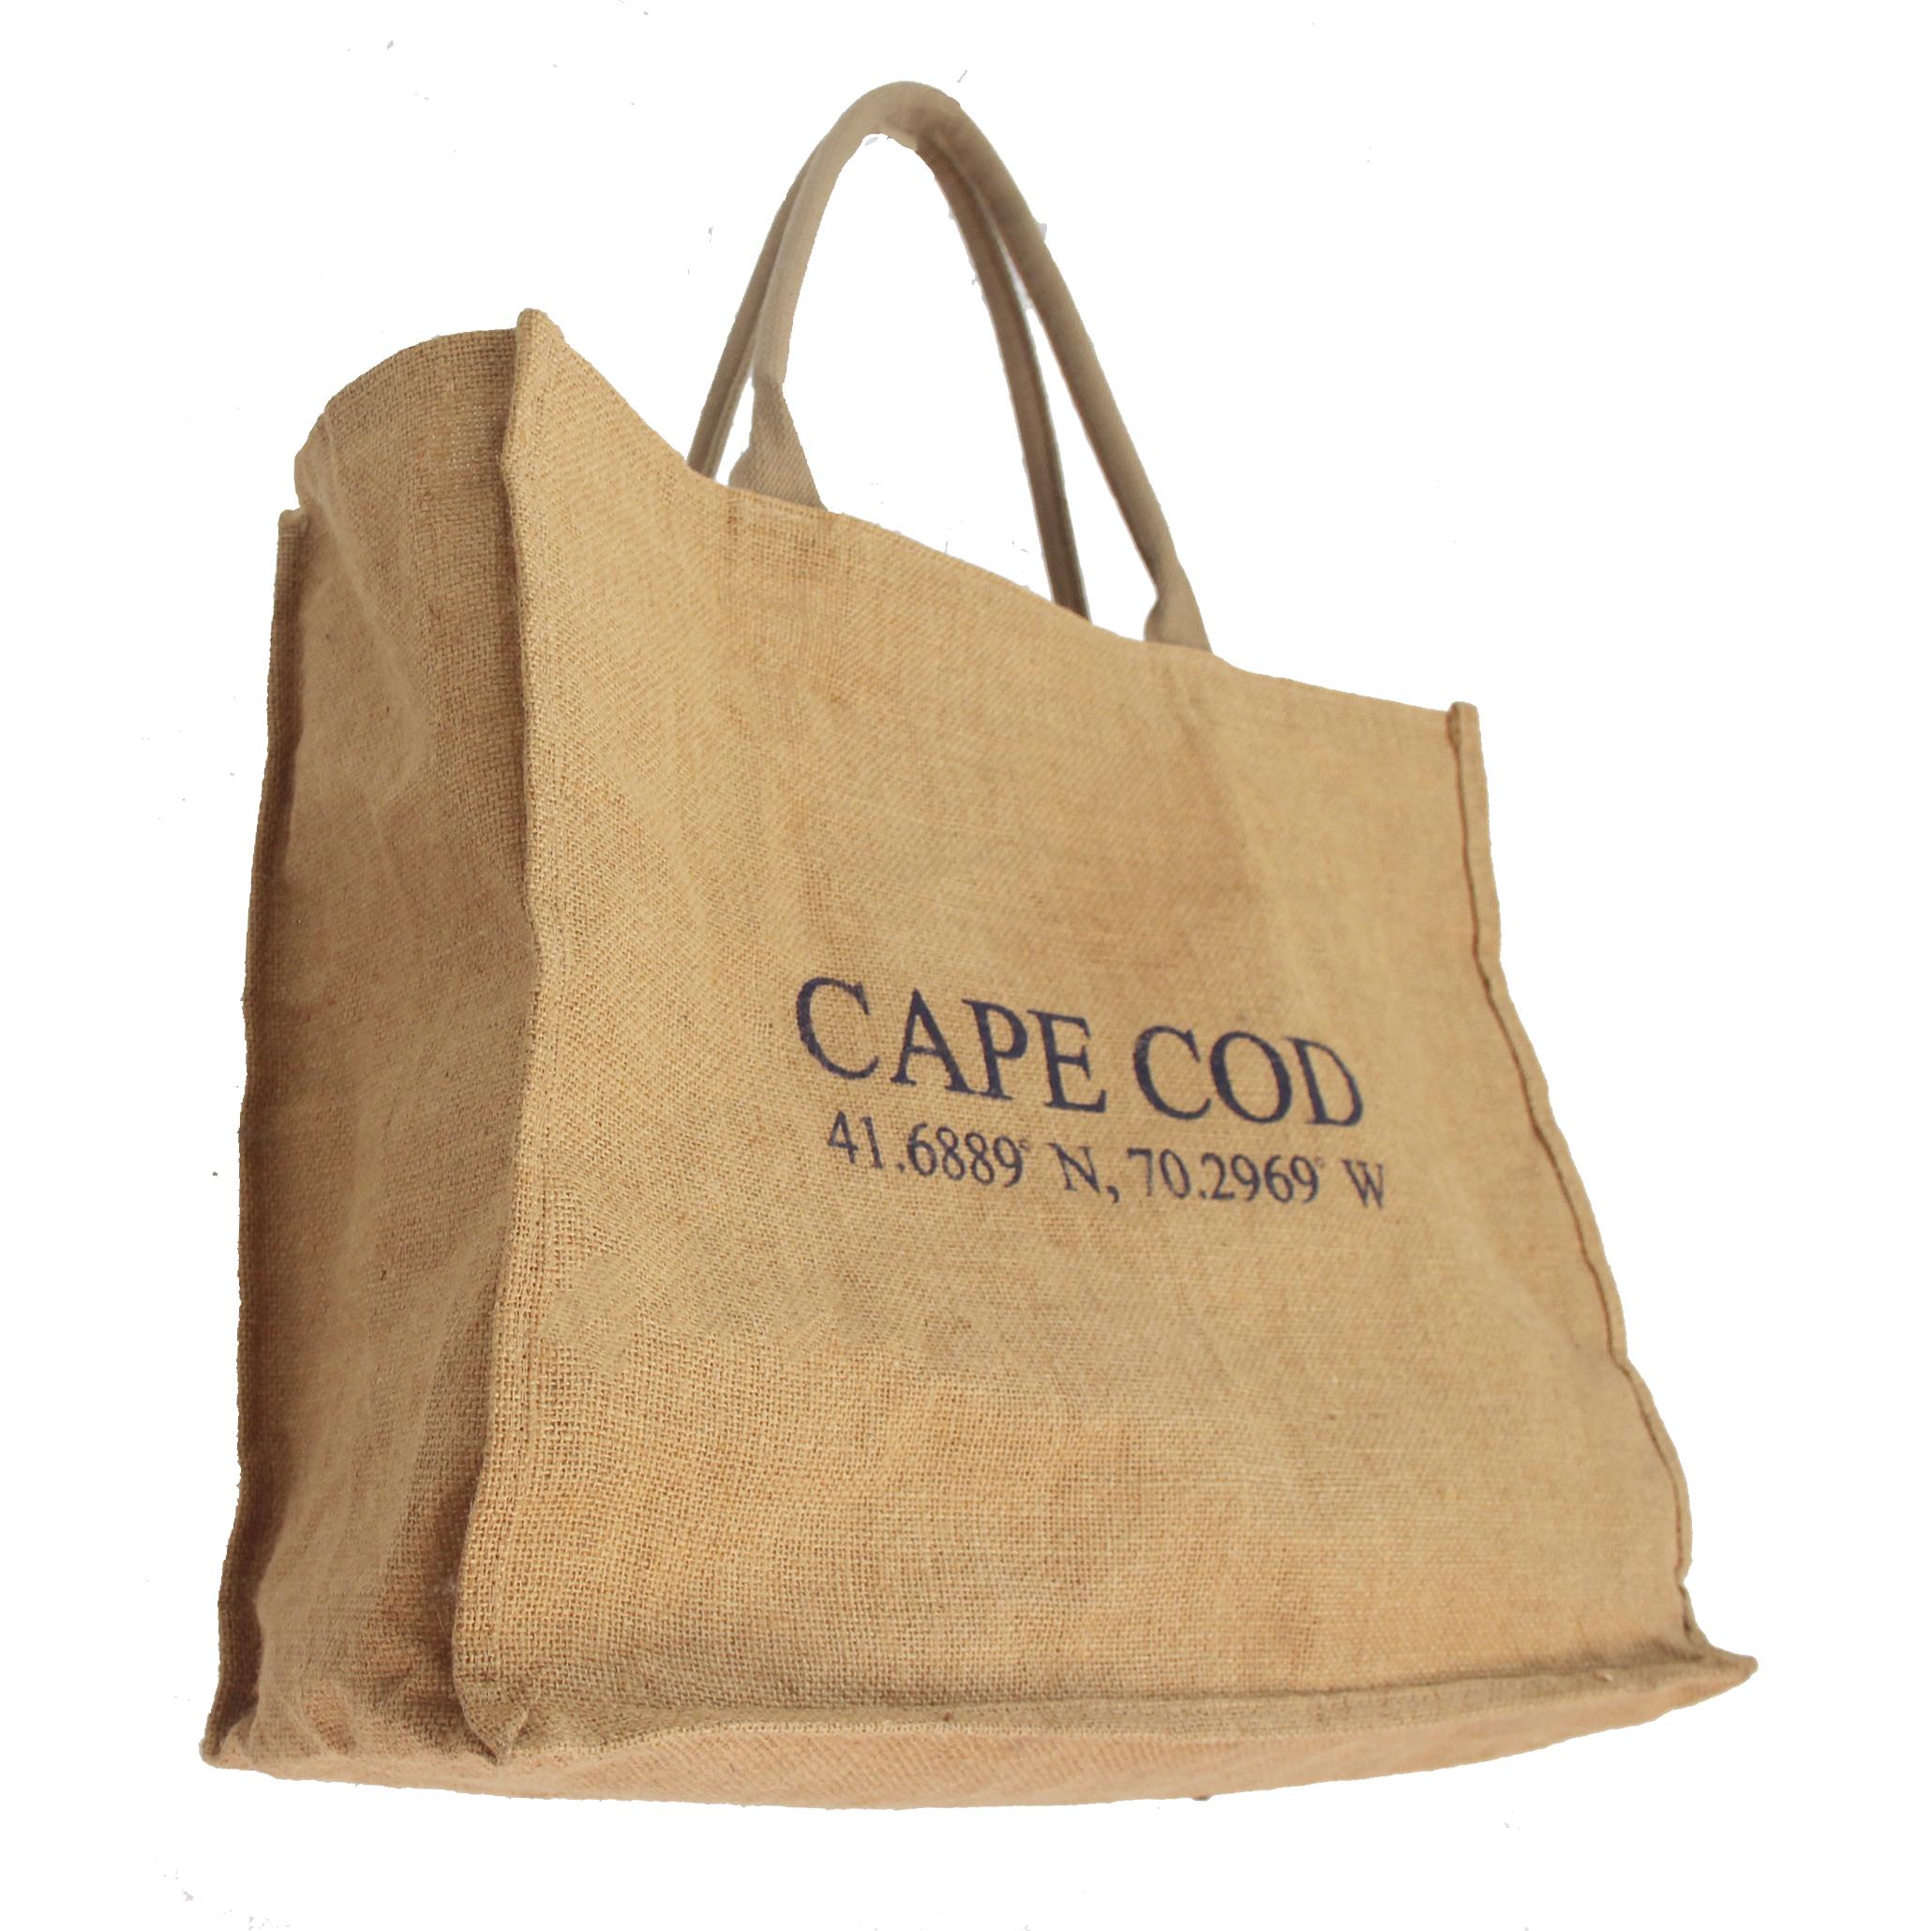 Authentic, chic burlap tote with rubberized waterproof treatment on the inside. 
No lining except for the waterproof treatment to keep its organic cool!
Great size: approximately 19